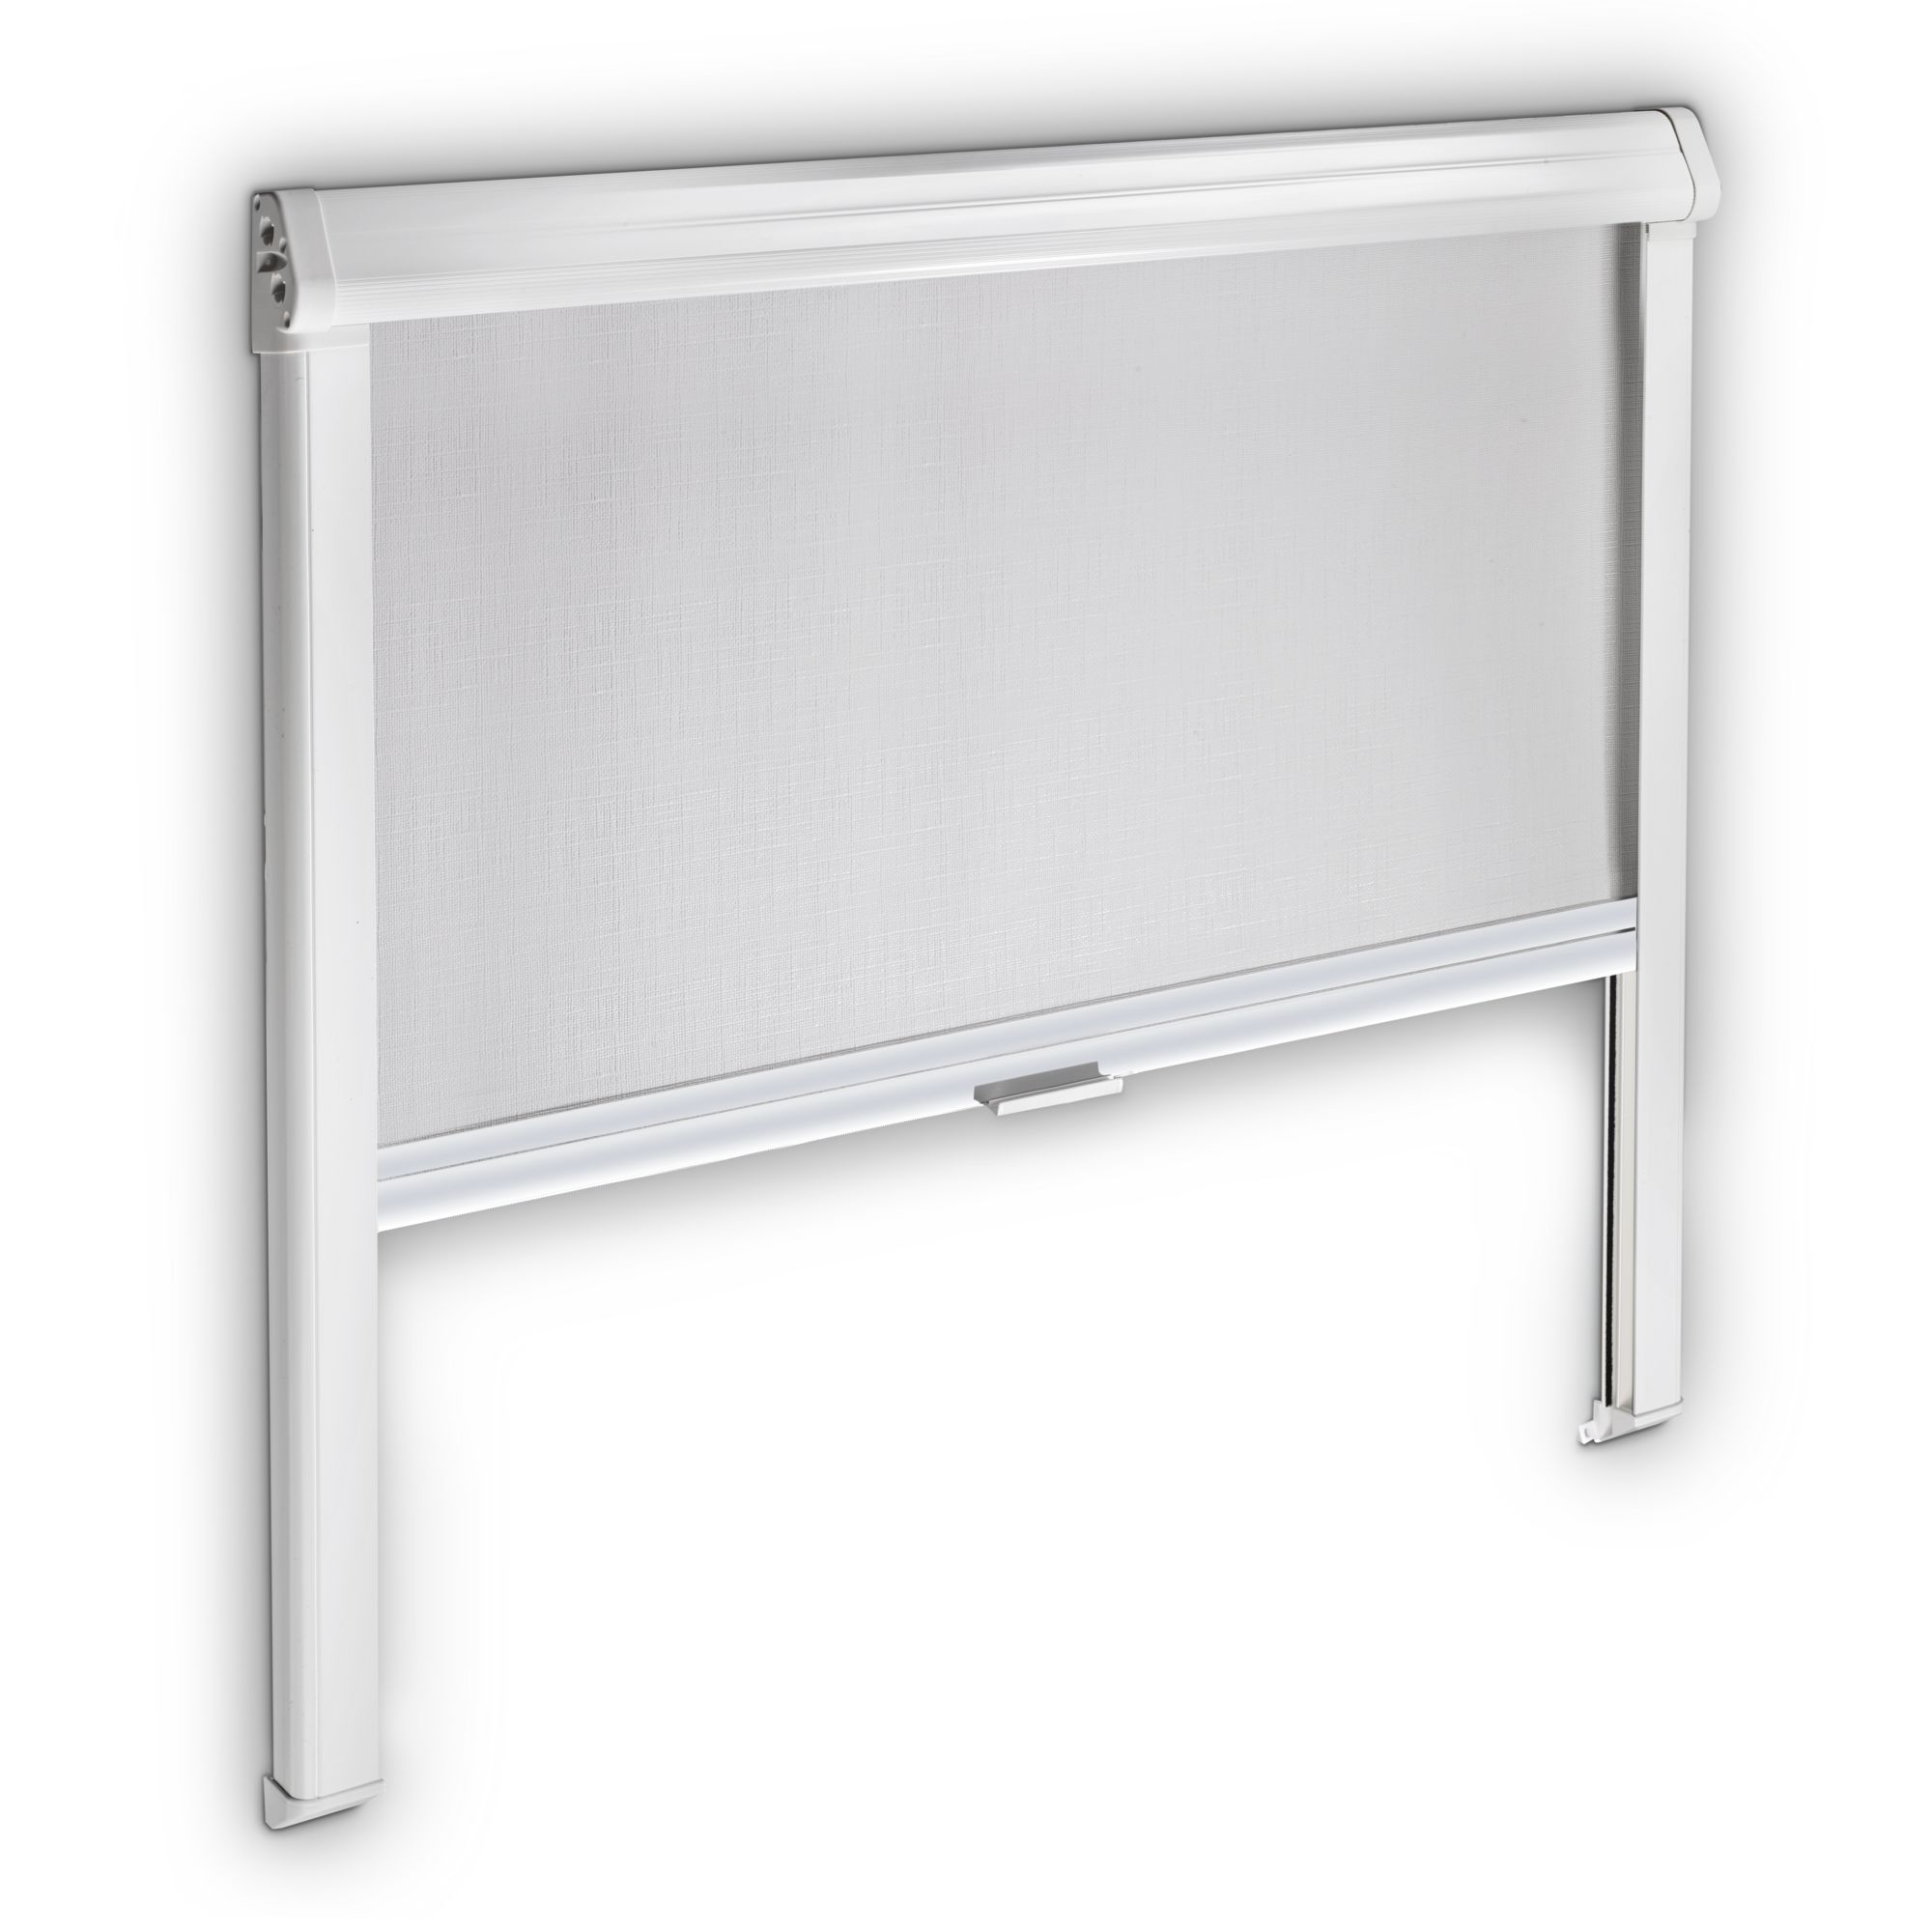 Dometic Black-Out Roller Blind 3000, 760 x 710 mm, grey-white